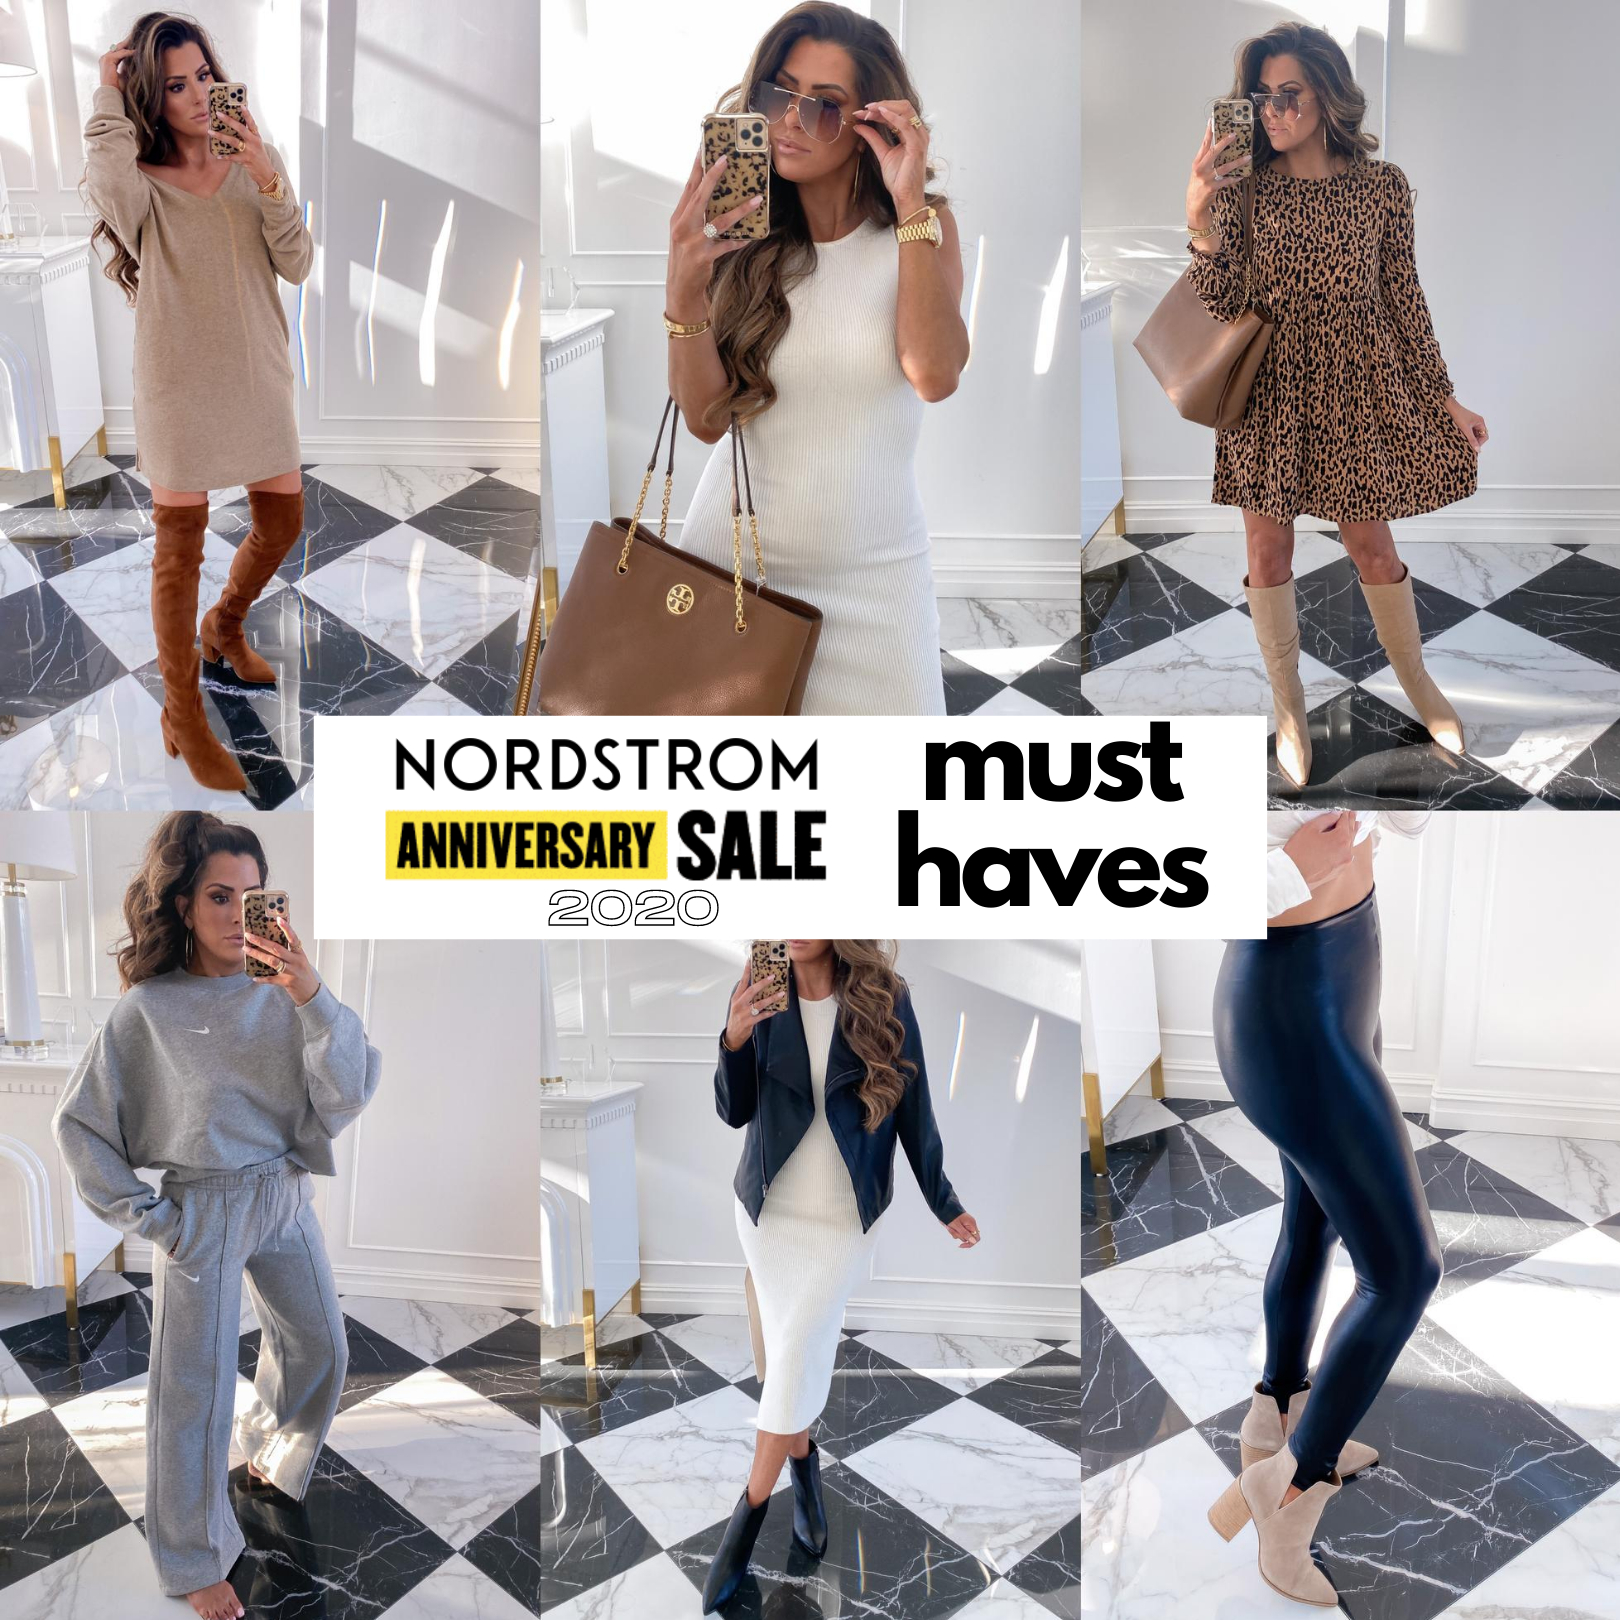 Nordstrom Anniversary sale 2020 try on, NSALE 2020 top picks, Nordstrom anniversary sale shoes, emily gemma | Nordstrom Anniversary Sale by popular US fashion blog, The Sweetest Thing: collage image of Emily Gemma wearing various Nordstrom clothing items and accessories. 